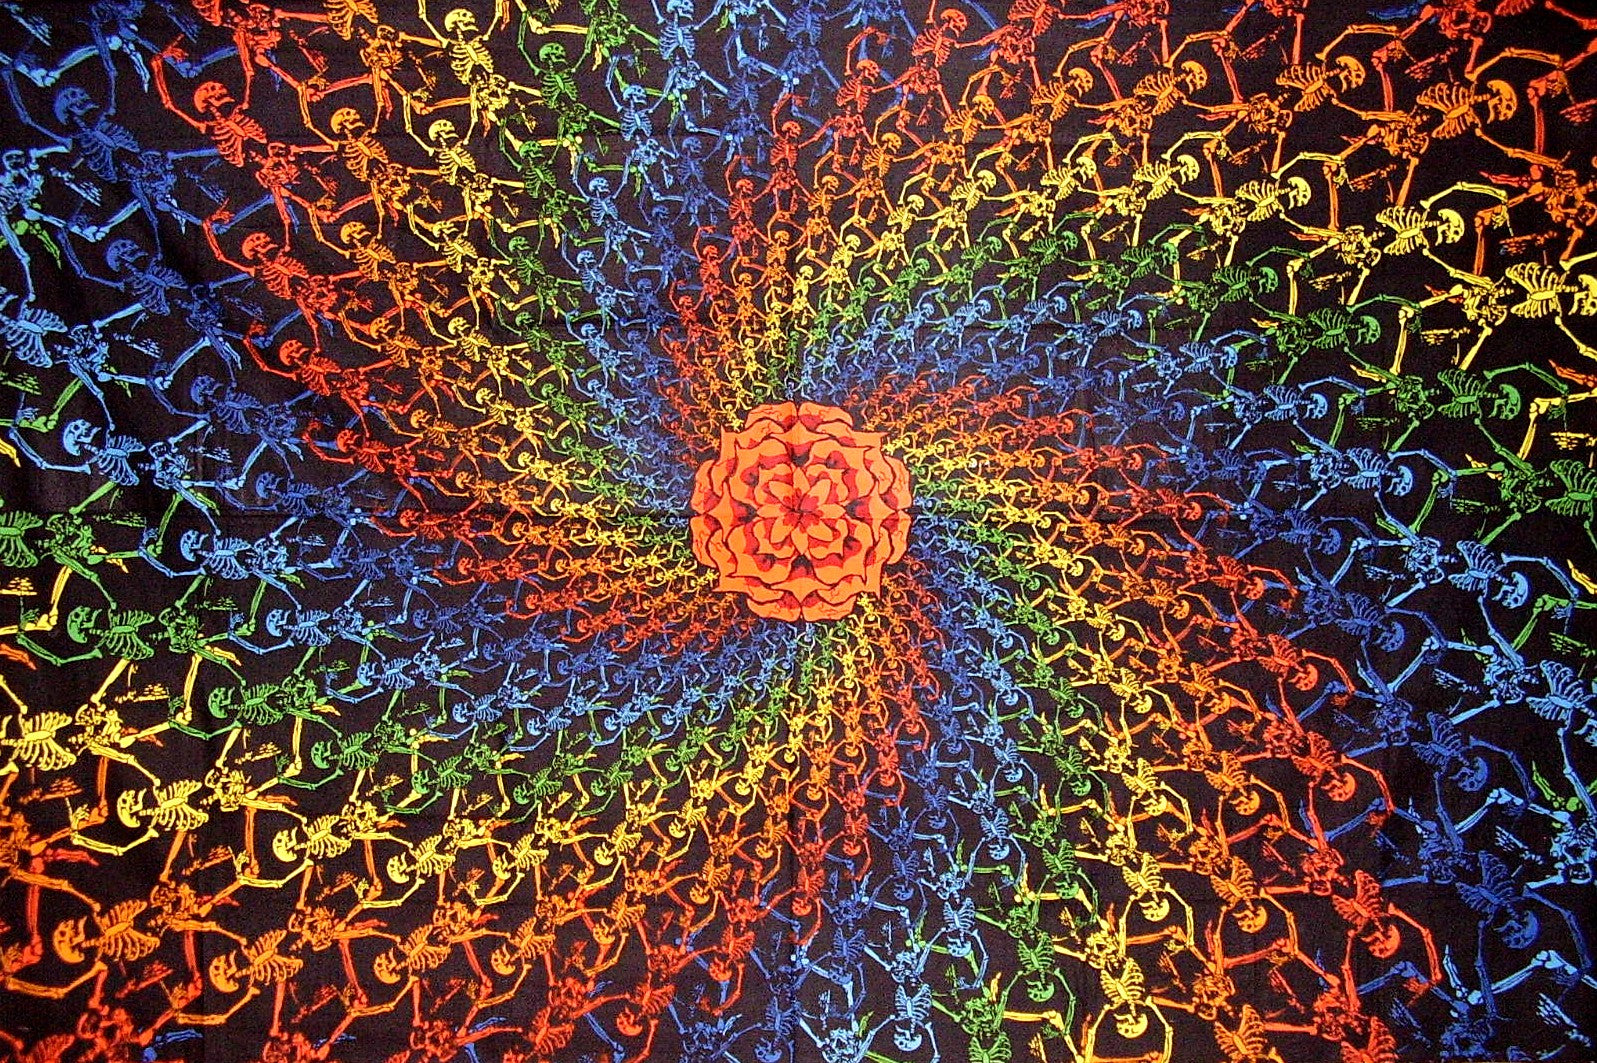 Psychedelic 3-D Spiral Skeletons Cotton Wall Hanging 90" x 60" Multi Color 